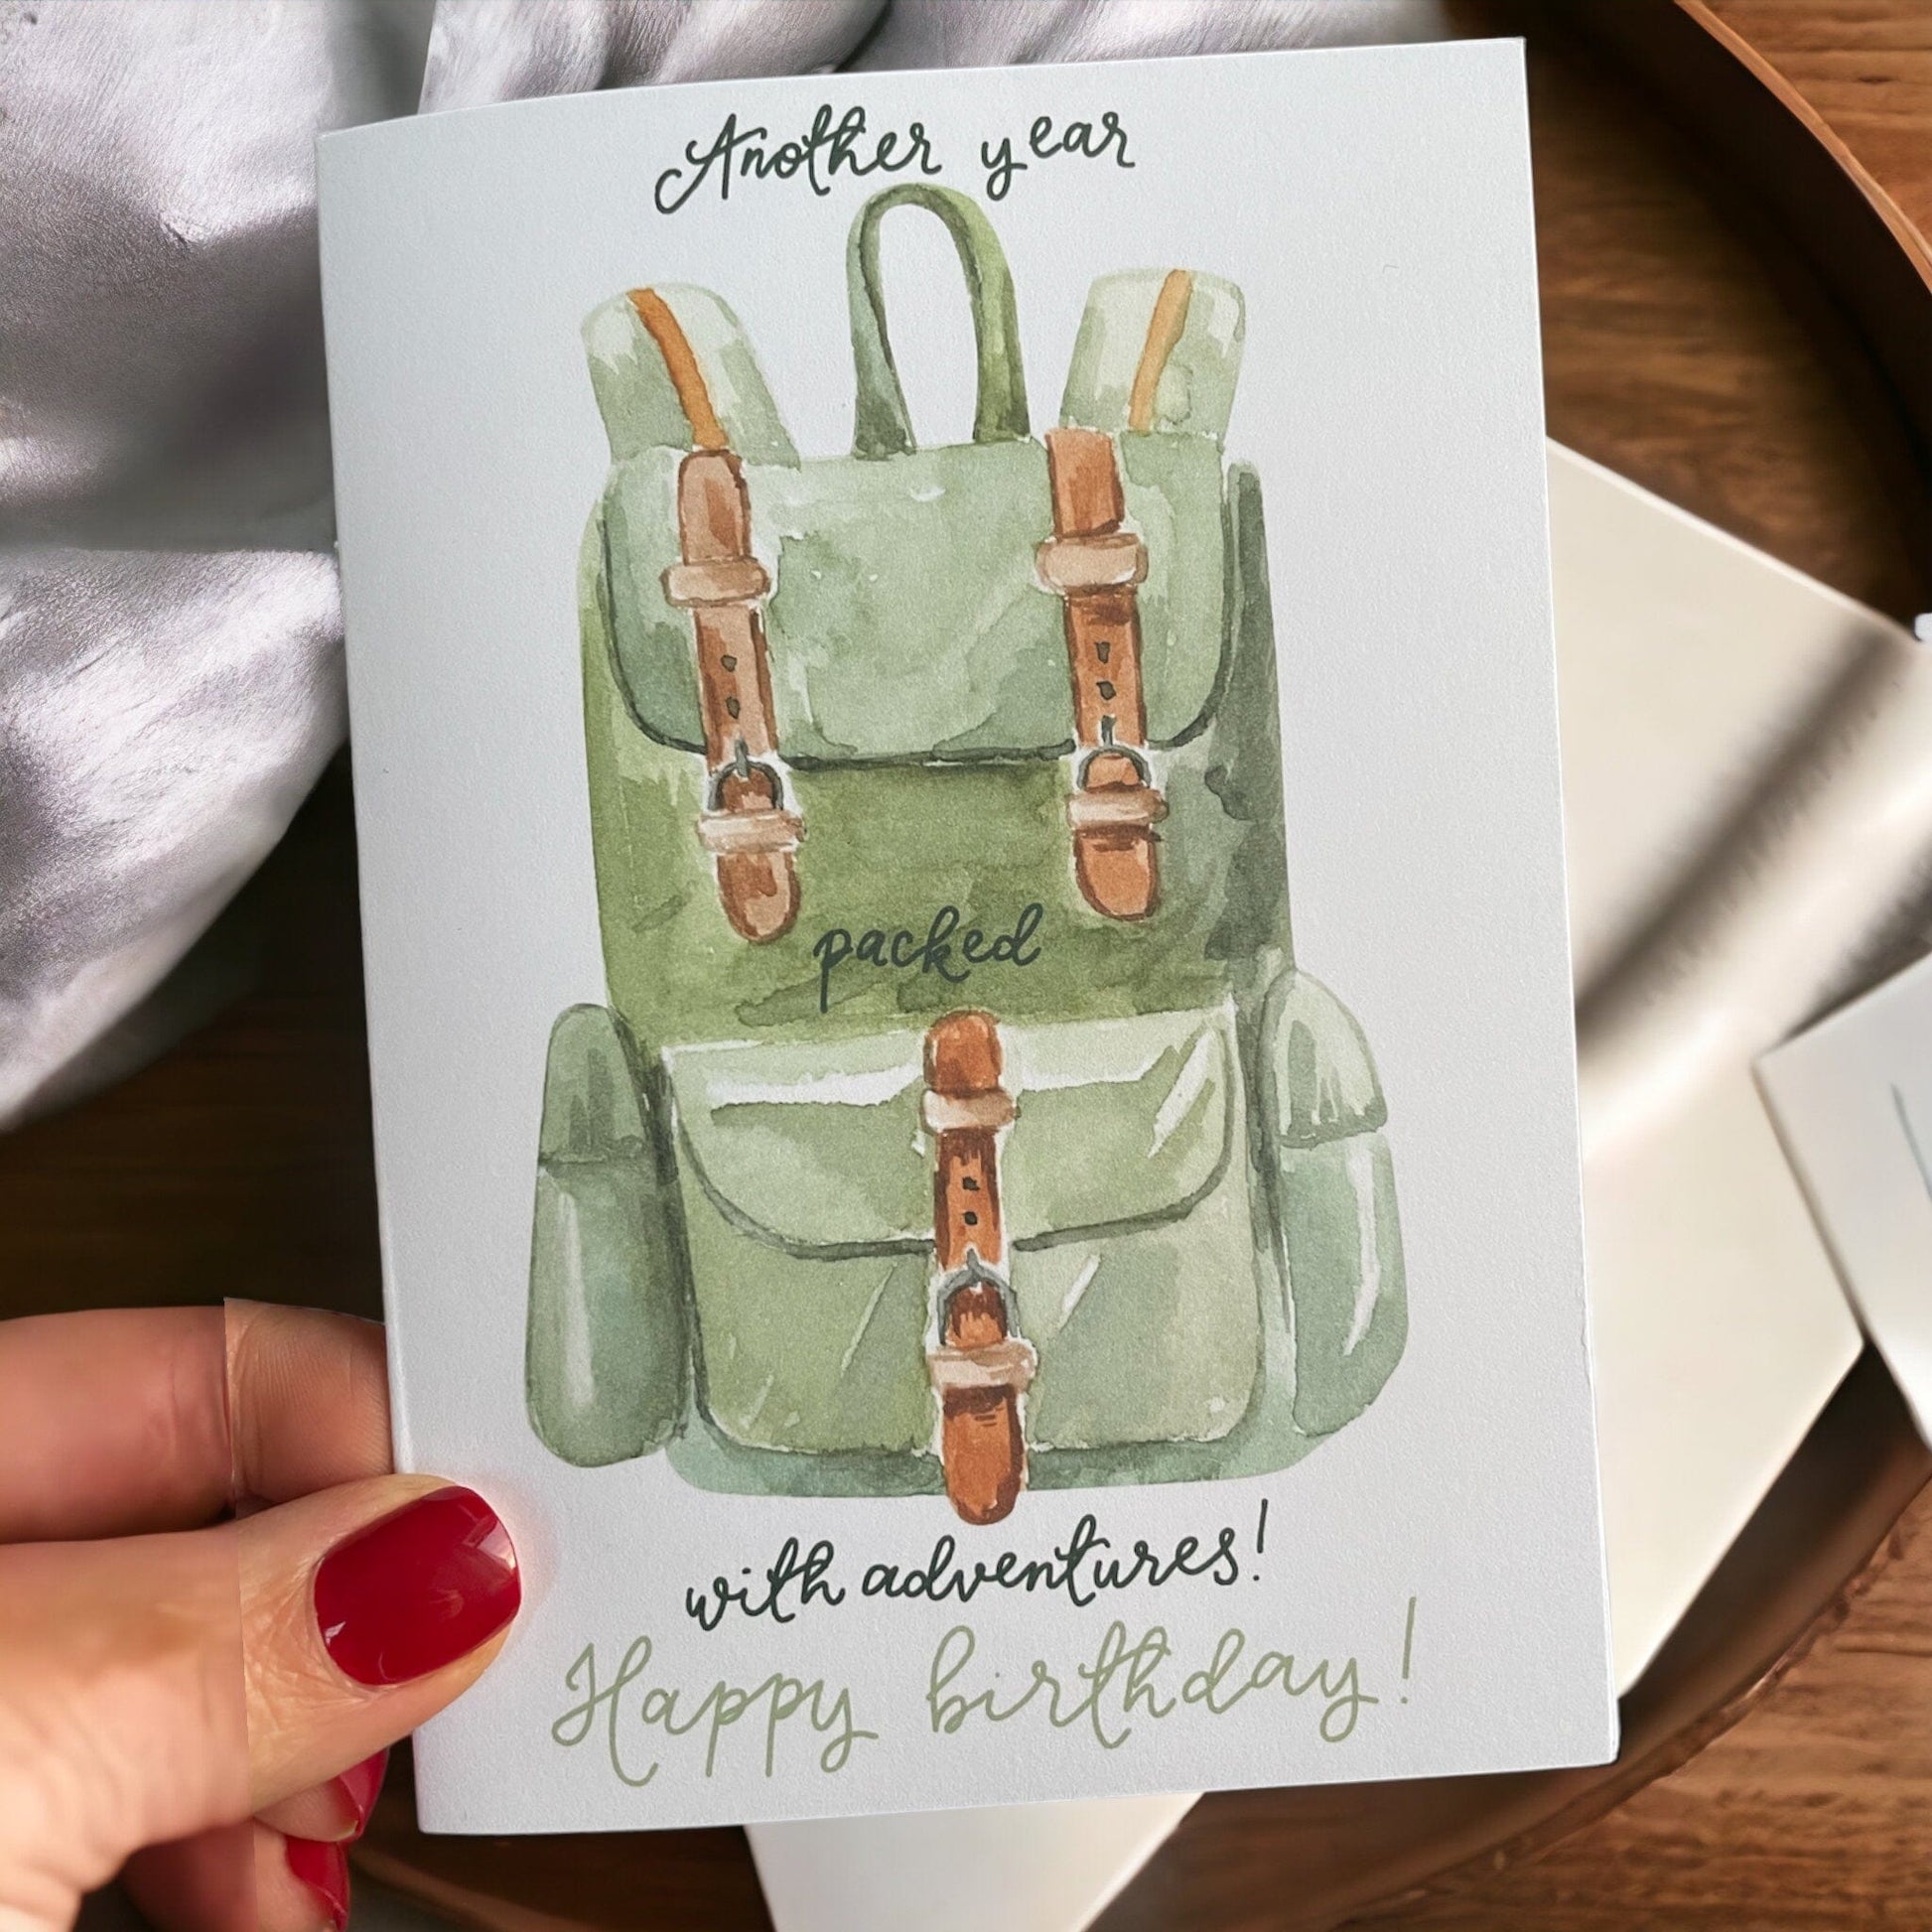 And Hope Designs Another year packed with adventures birthday card